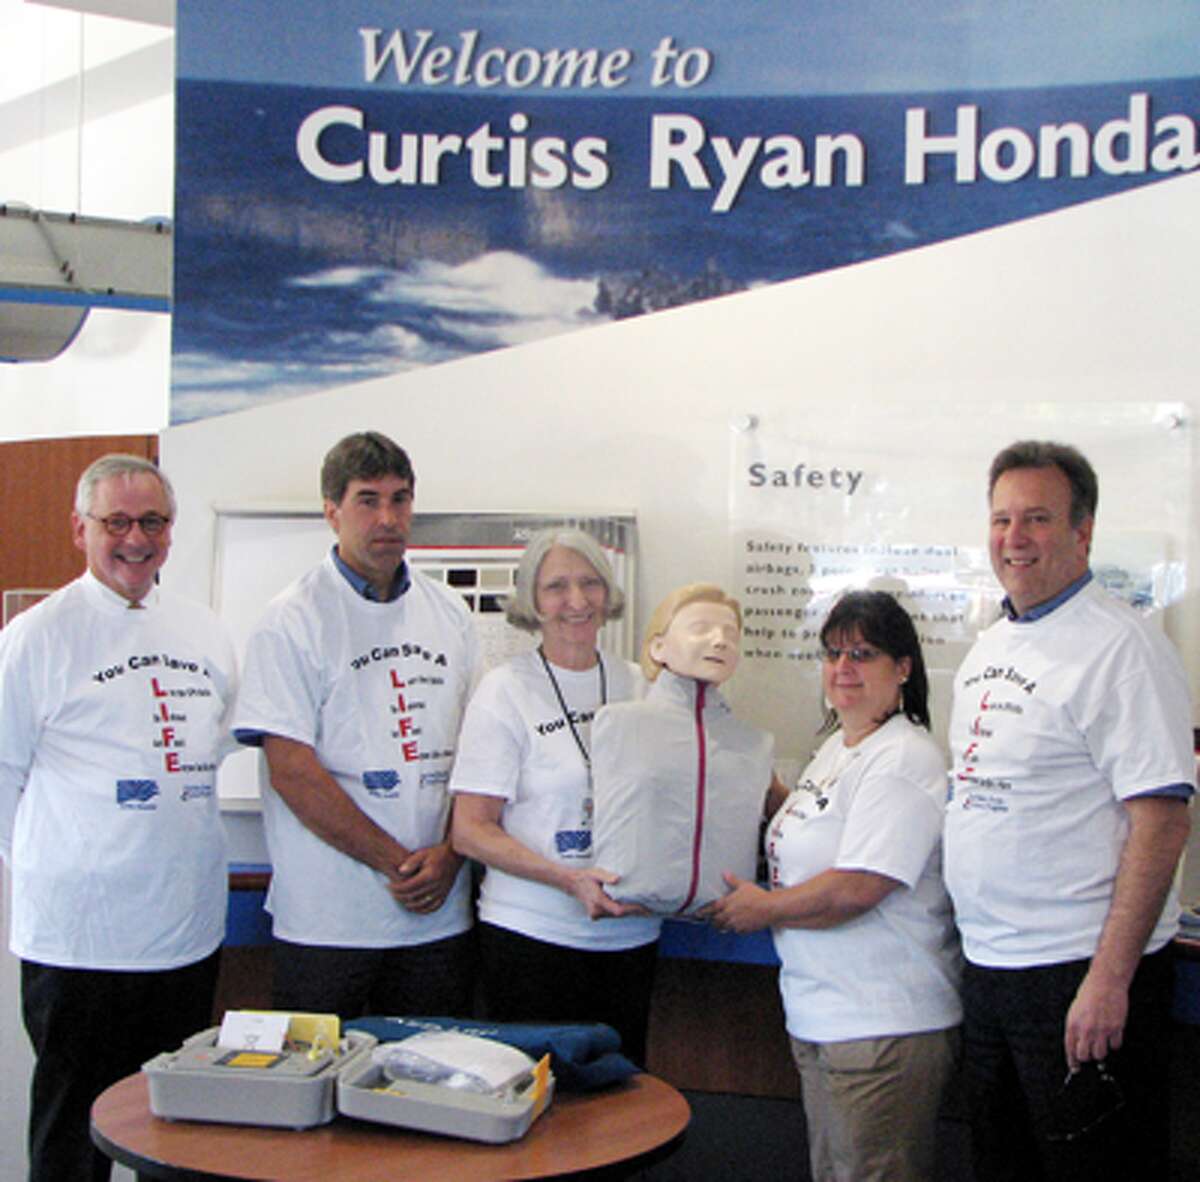 Attending the presentation of a CPR unit to Griffin Hospital are, from left, James Fleming of the Connecticut Automotive Retailers Association; Rick Foehrenbach of Curtiss Ryan Honda; Daun Barrett of Griffin Hospital Community Outreach and Valley Parish Nursing; Cathi Kellett of Griffin Hospital CPR Training Center; and Edward DeMarseilles of Curtiss Ryan Honda.